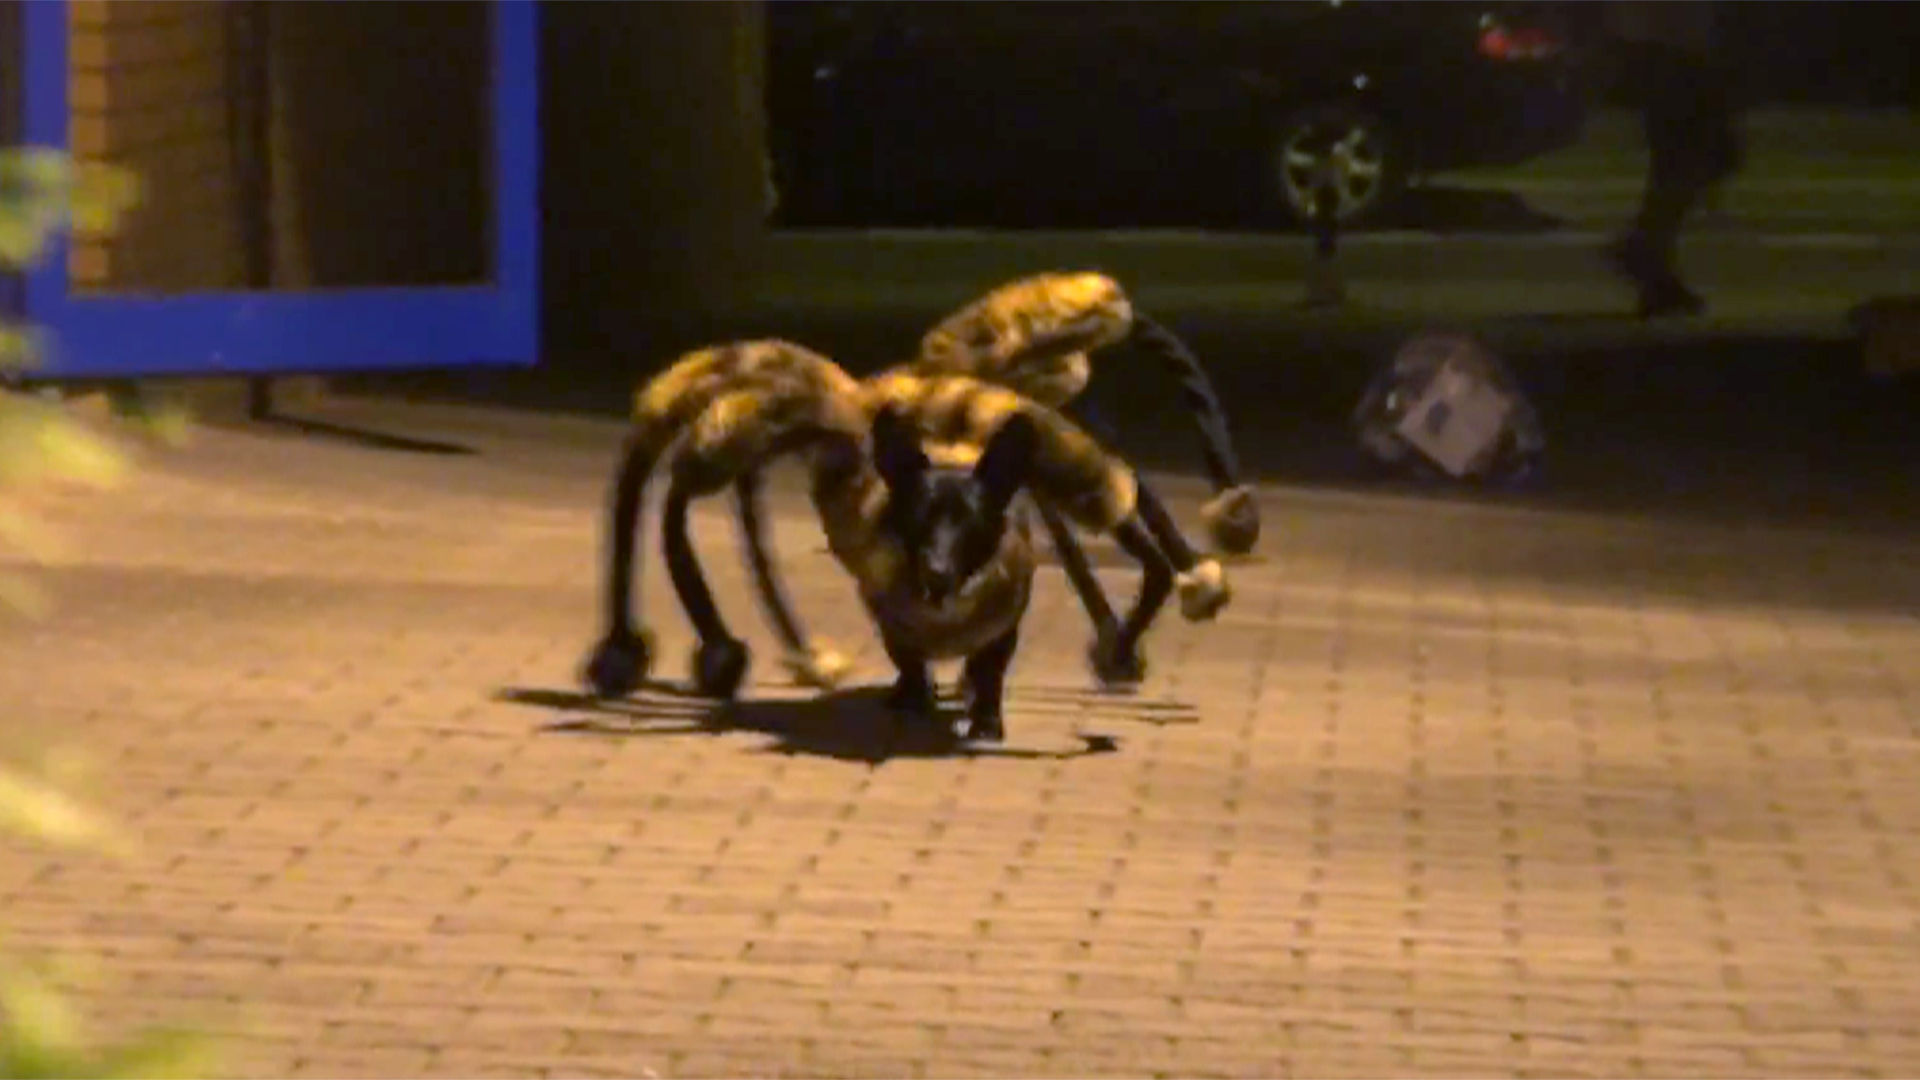 dog dressed as spider video